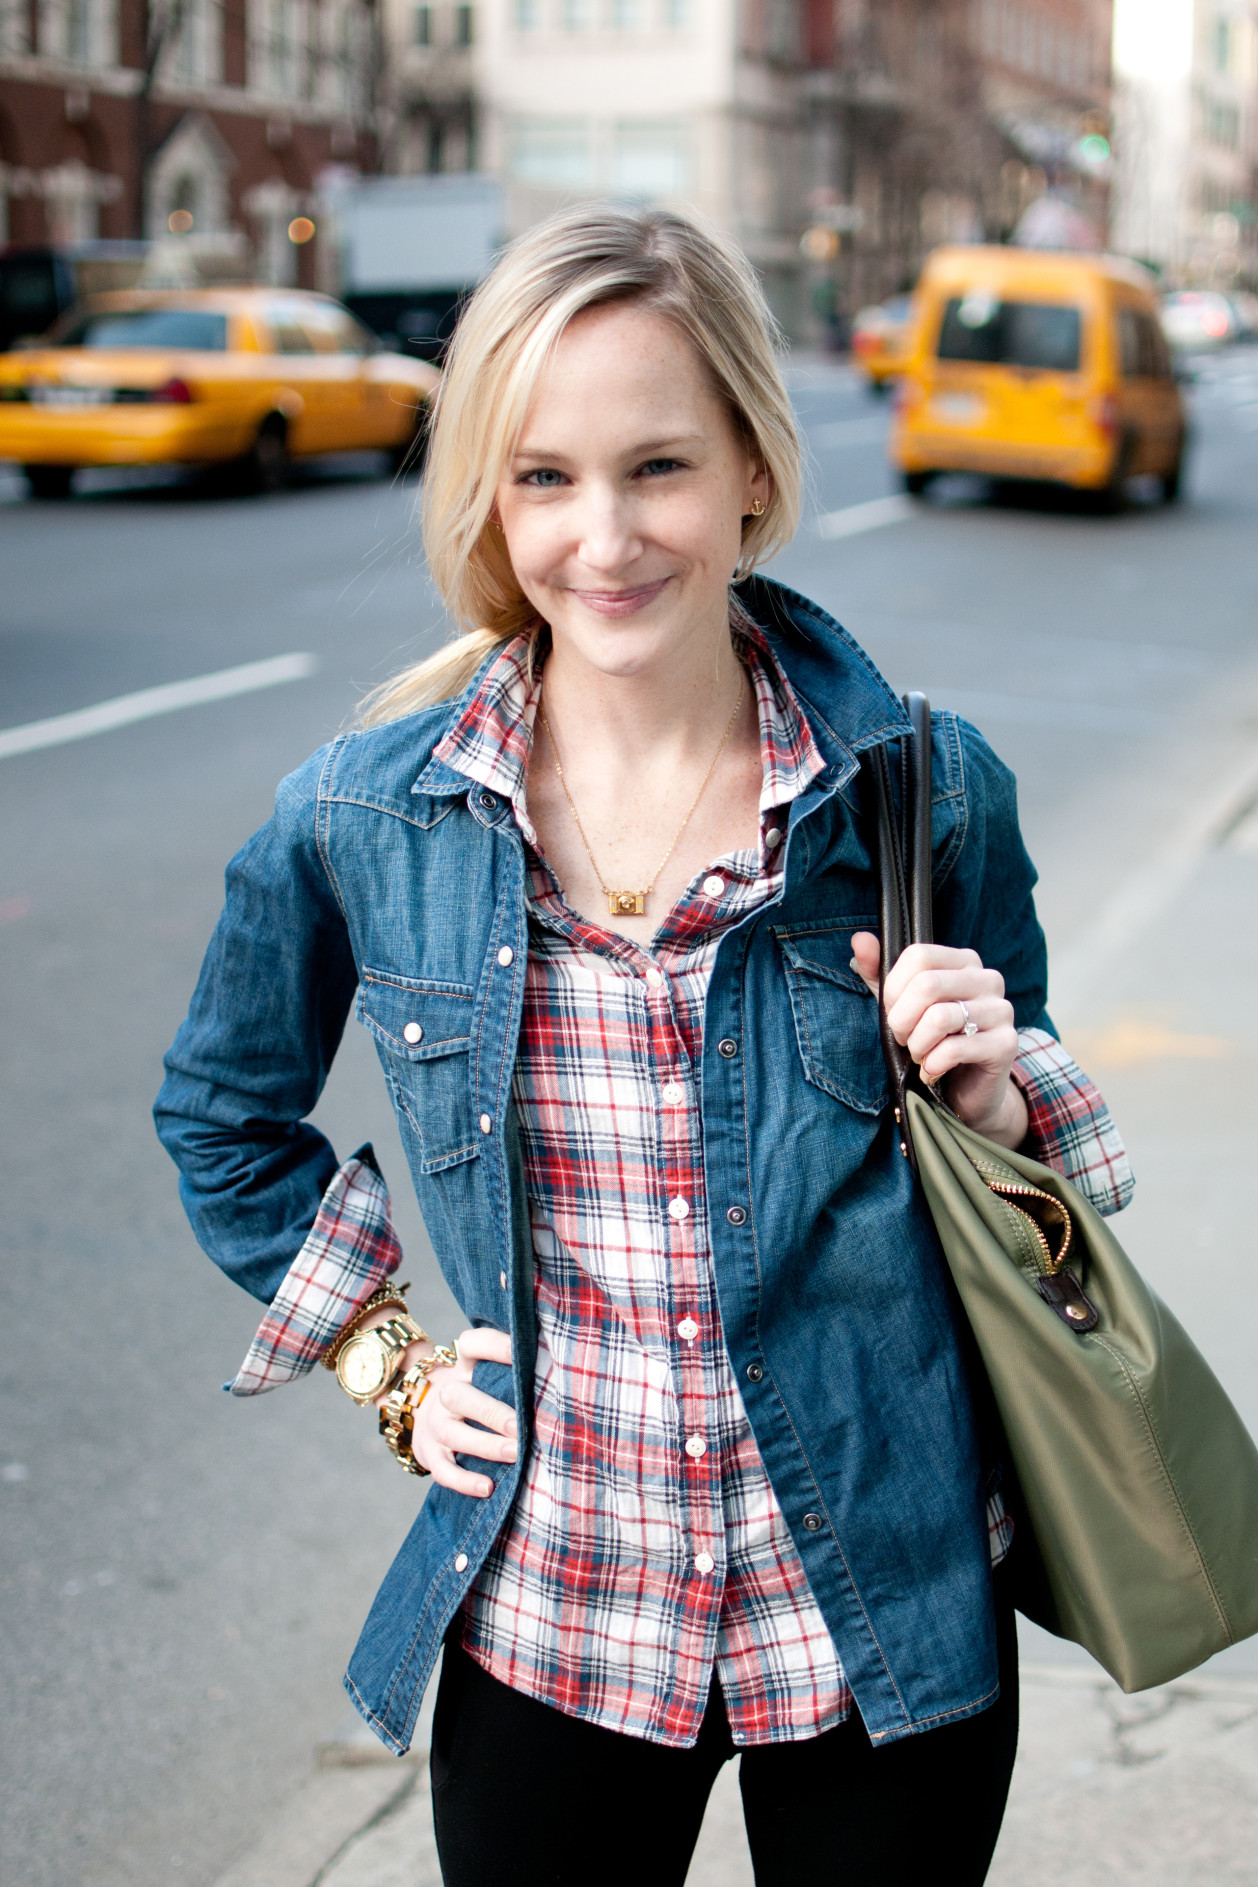 Denim Shirts over Plaid Shirts: Fighting the Cold in NYC